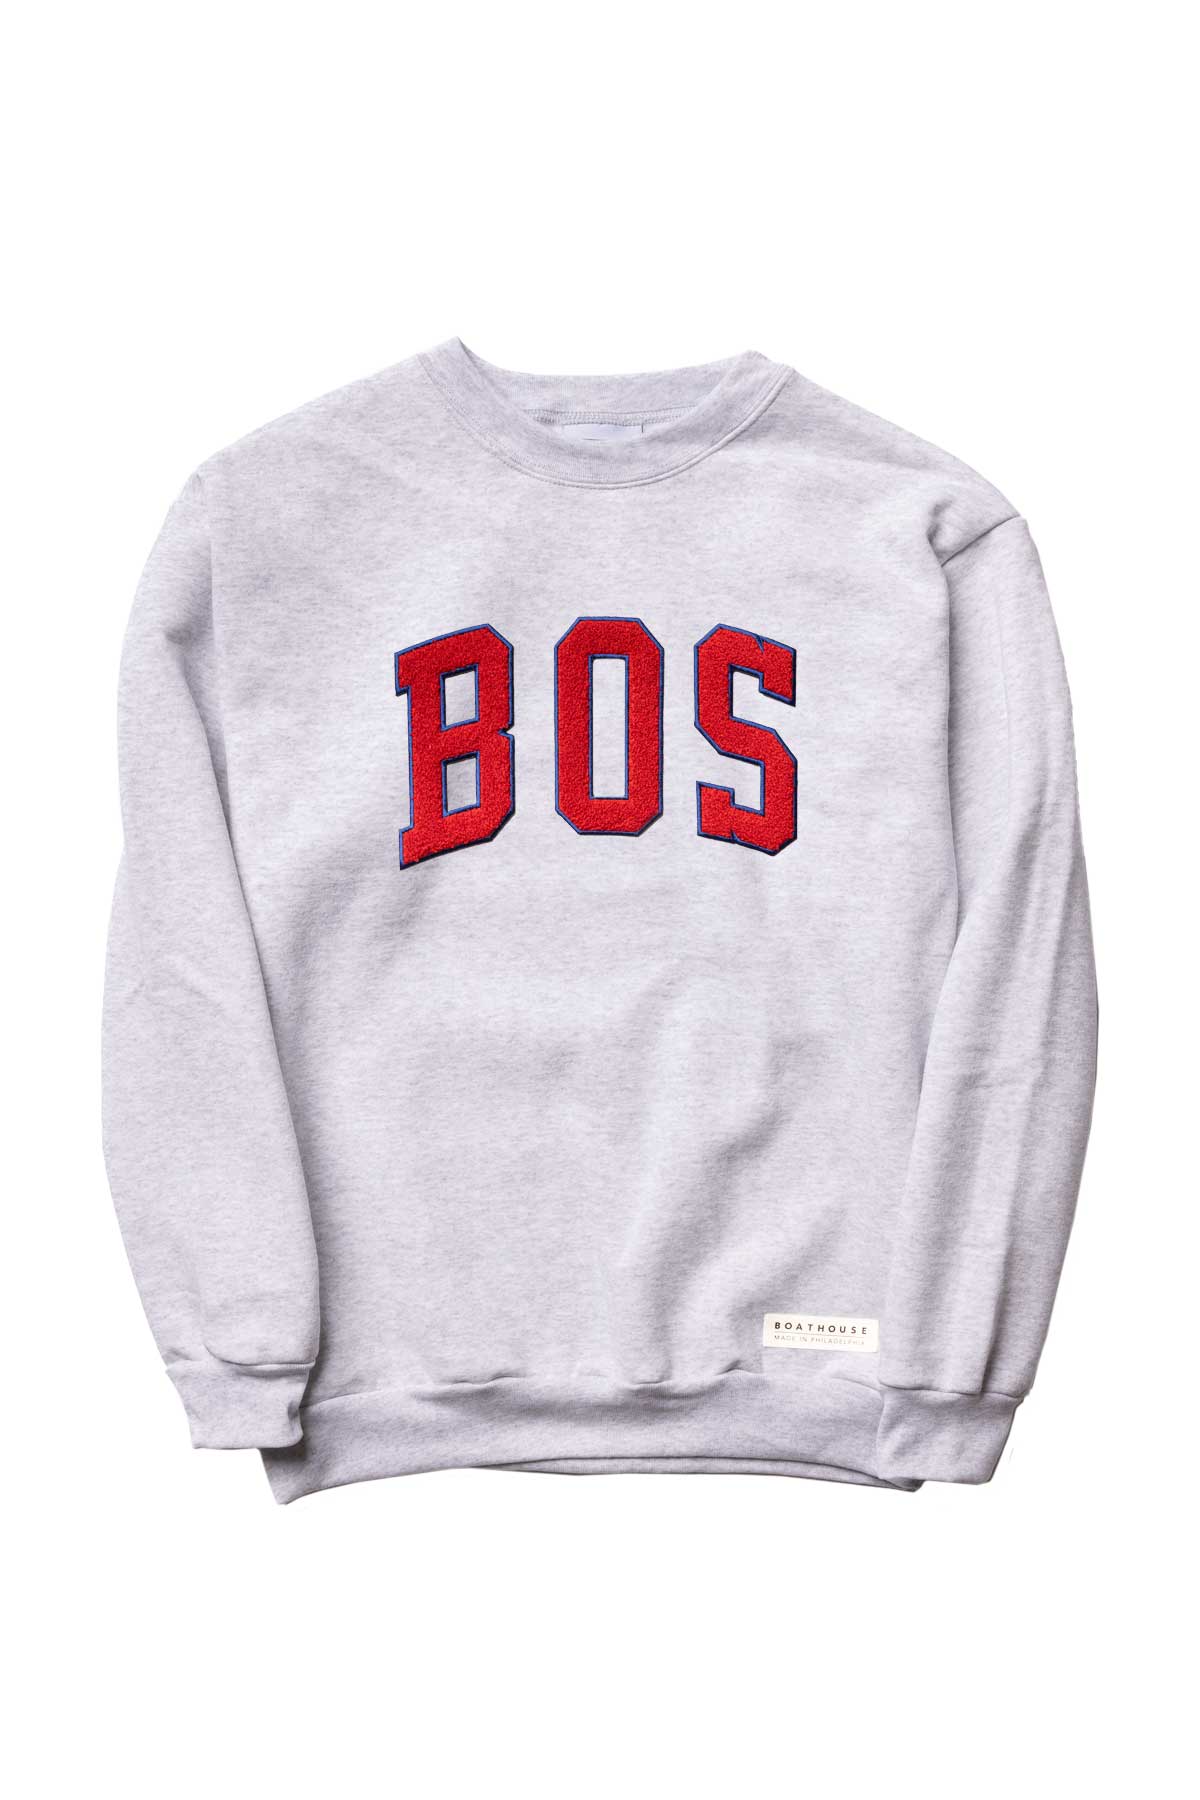 BOATHOUSE BOS CHENILLE CREW Grey / Small